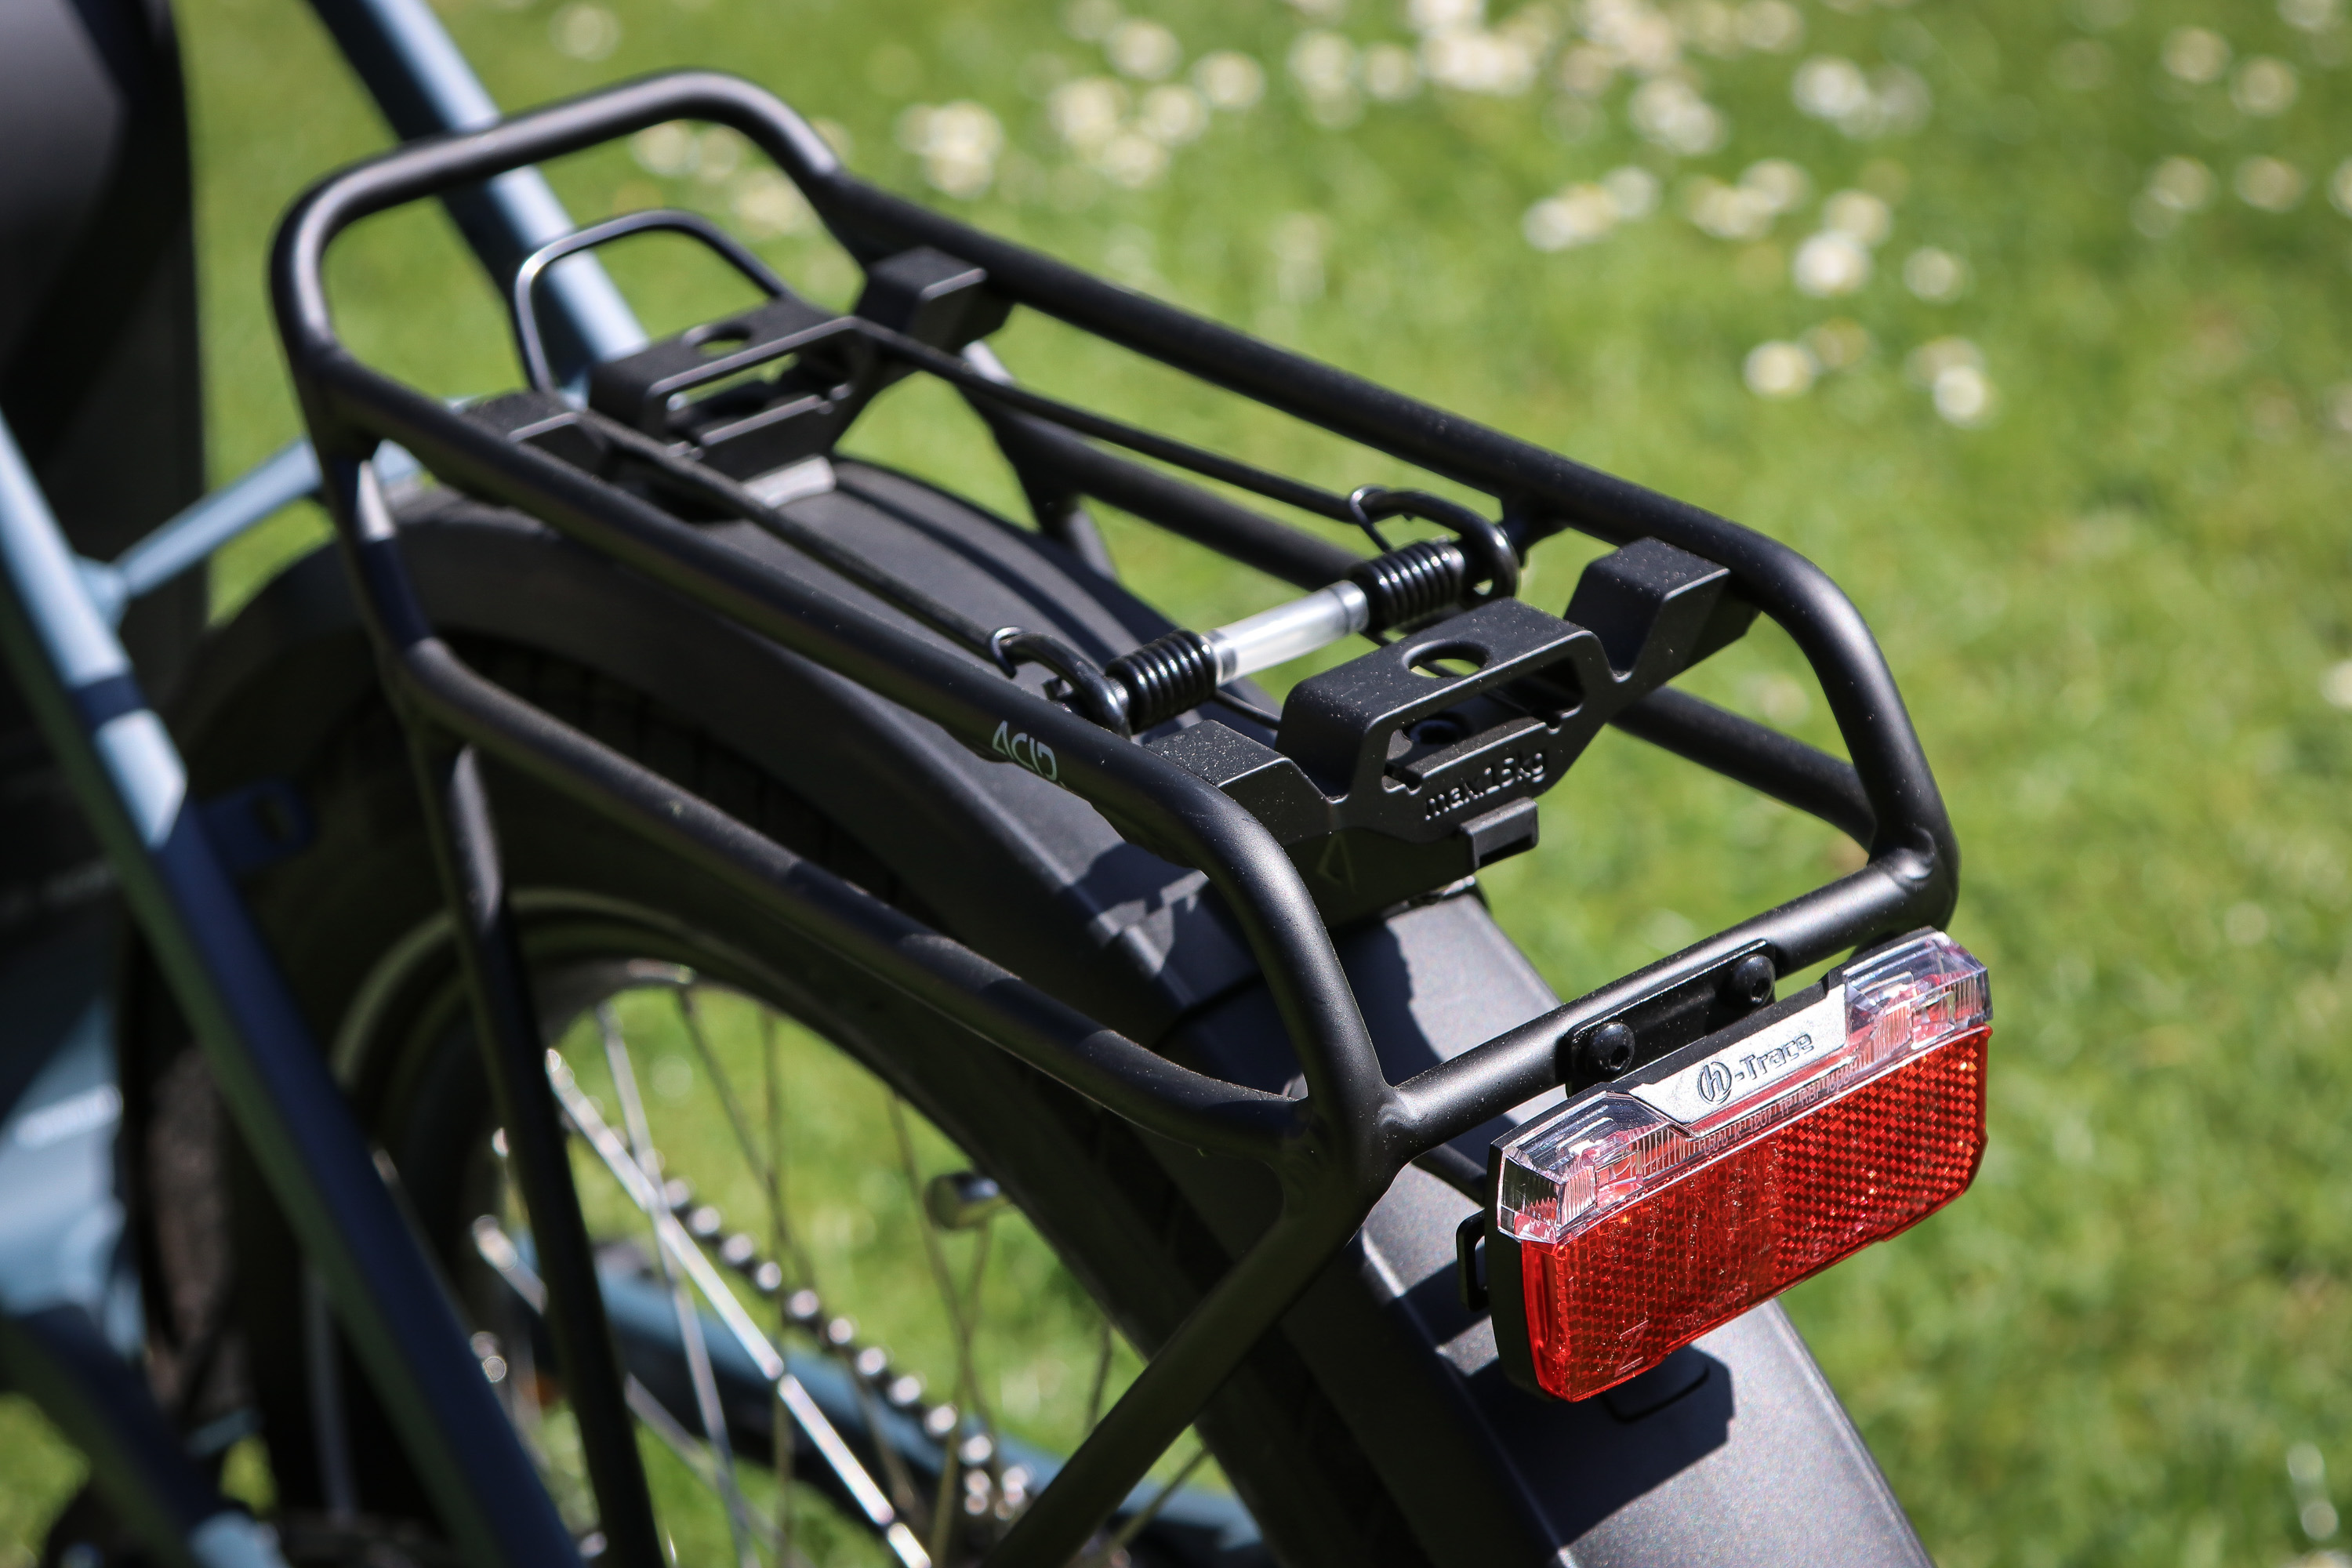 Cube Compact Sport Hybrid | electric bike reviews, buying advice and news -